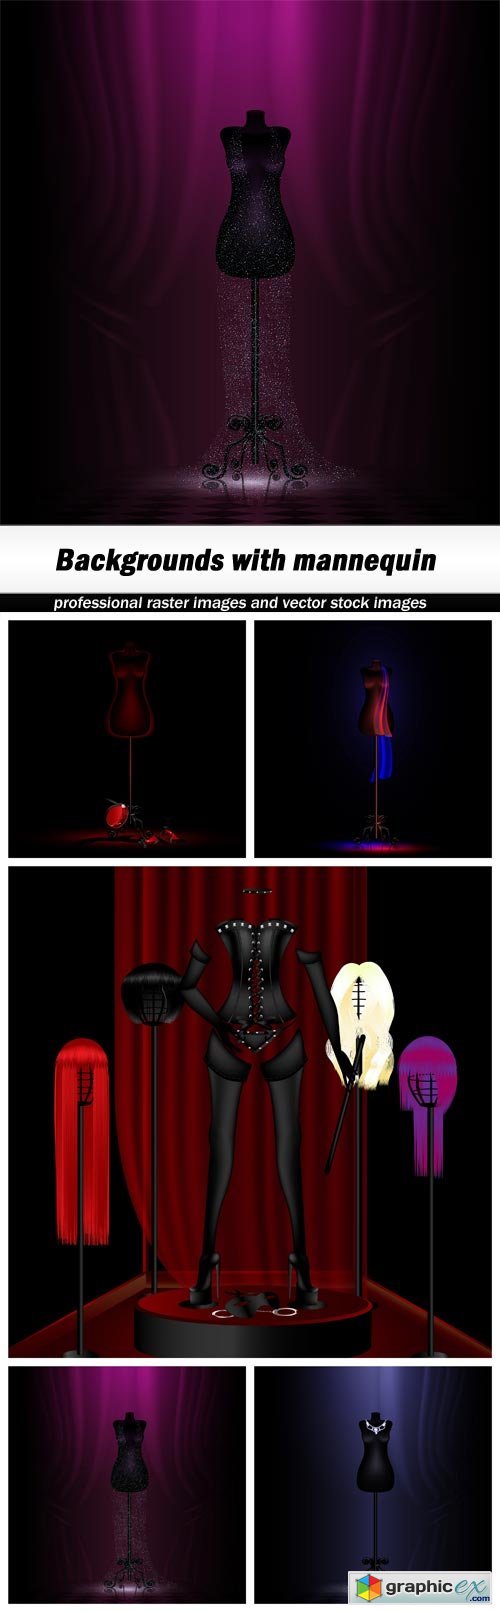 Backgrounds with mannequin - 5 EPS